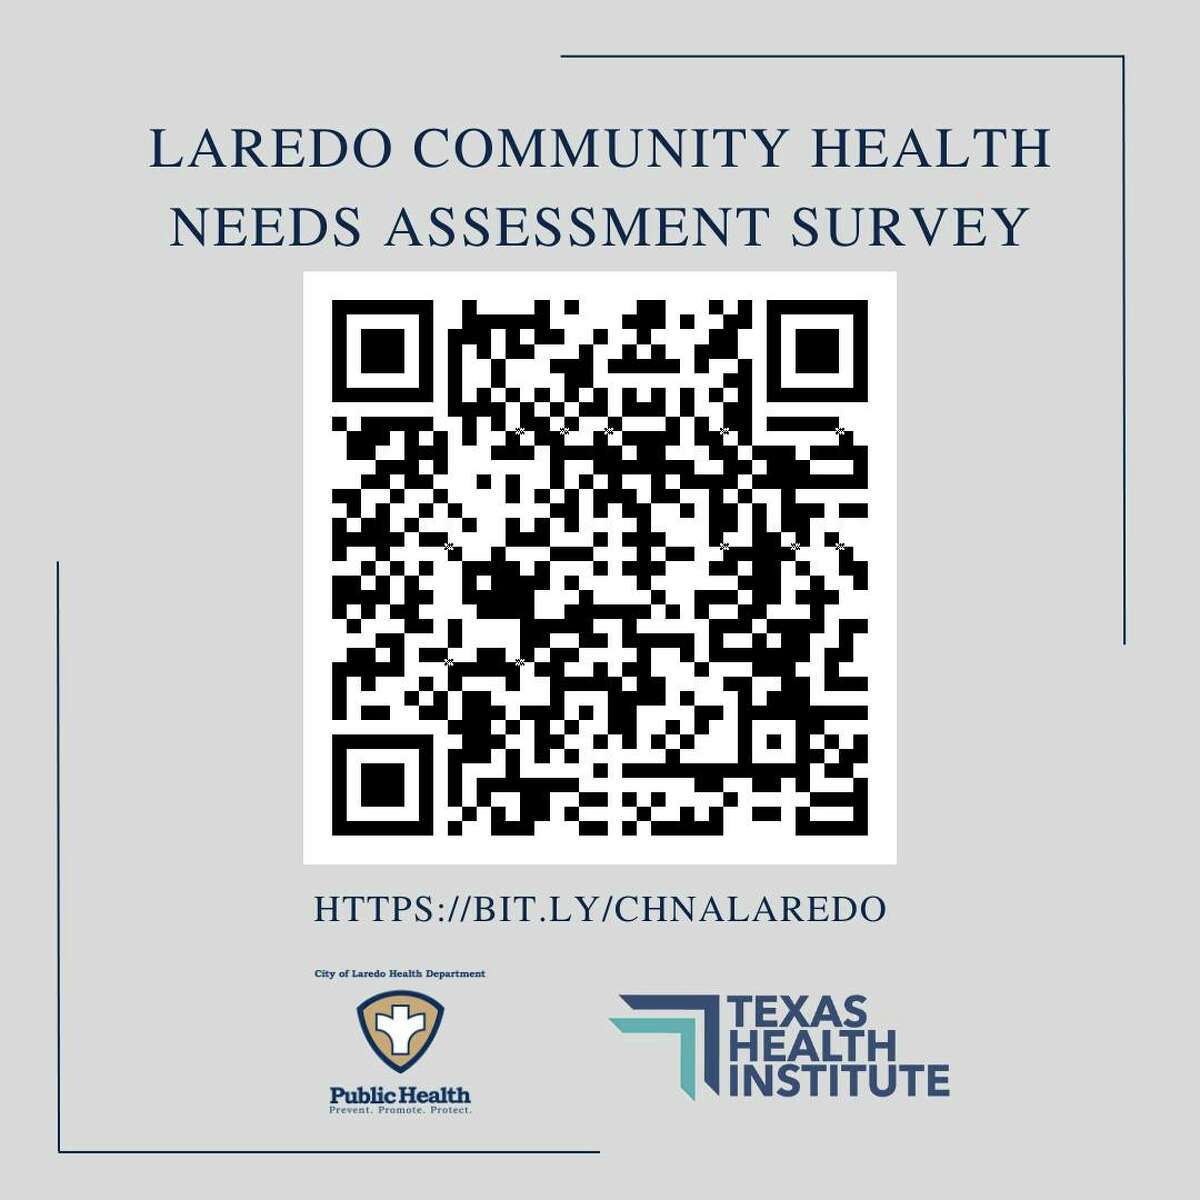 The City of Laredo is conducting a health survey through a partnership with the Texas Health Institute.